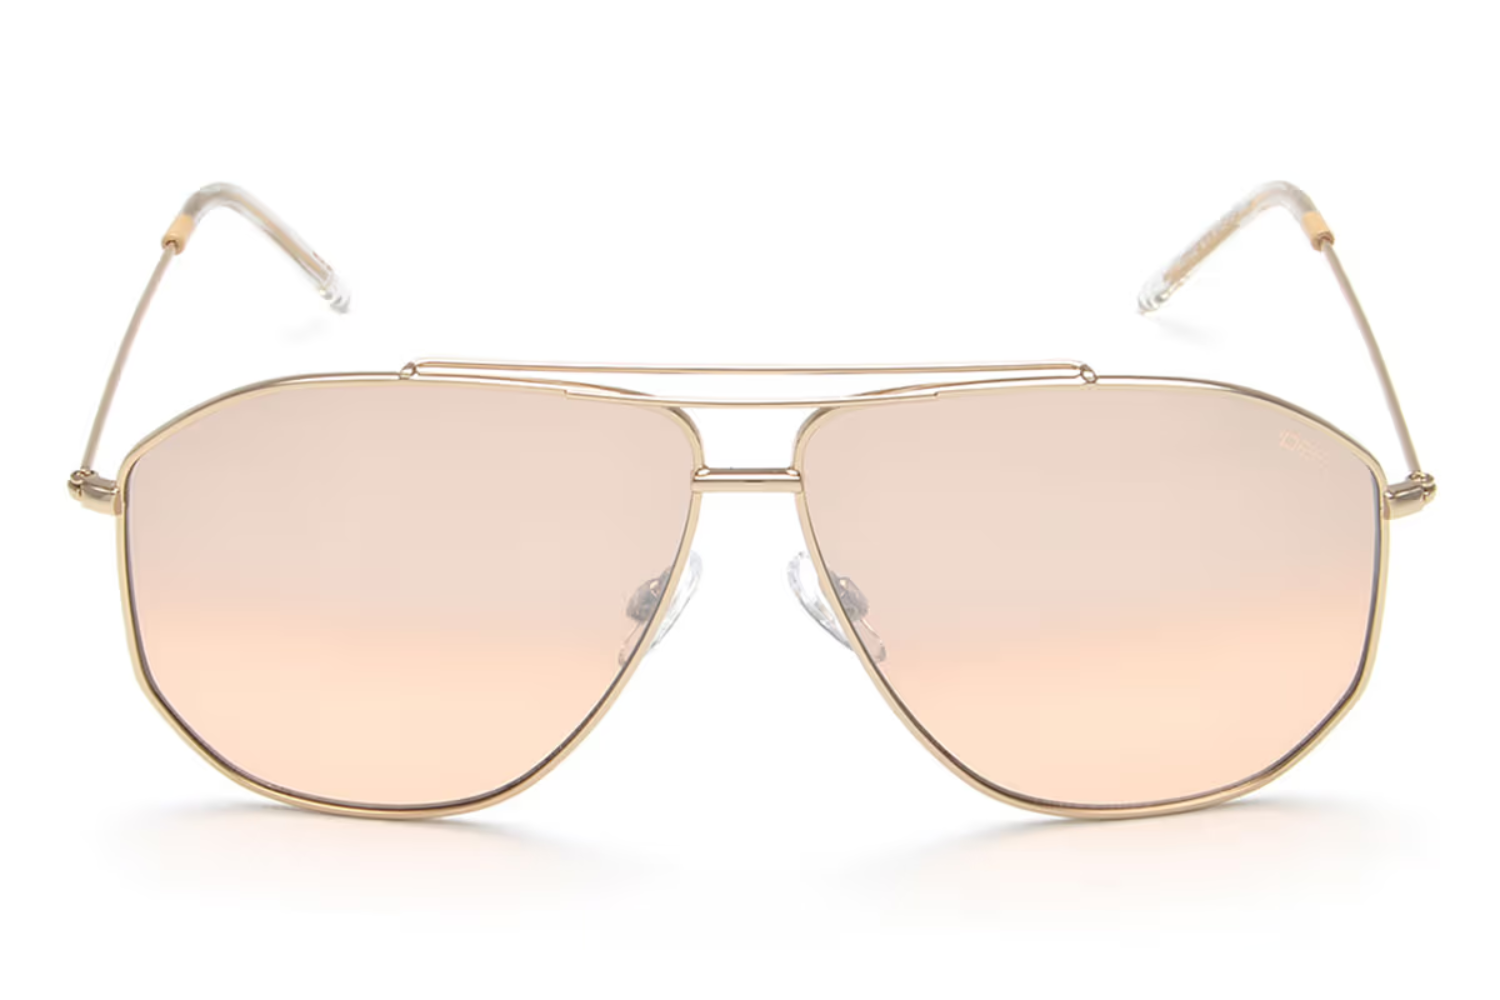 Oliver Peoples Releases Cary Grant 'North by Northwest'-Inspired